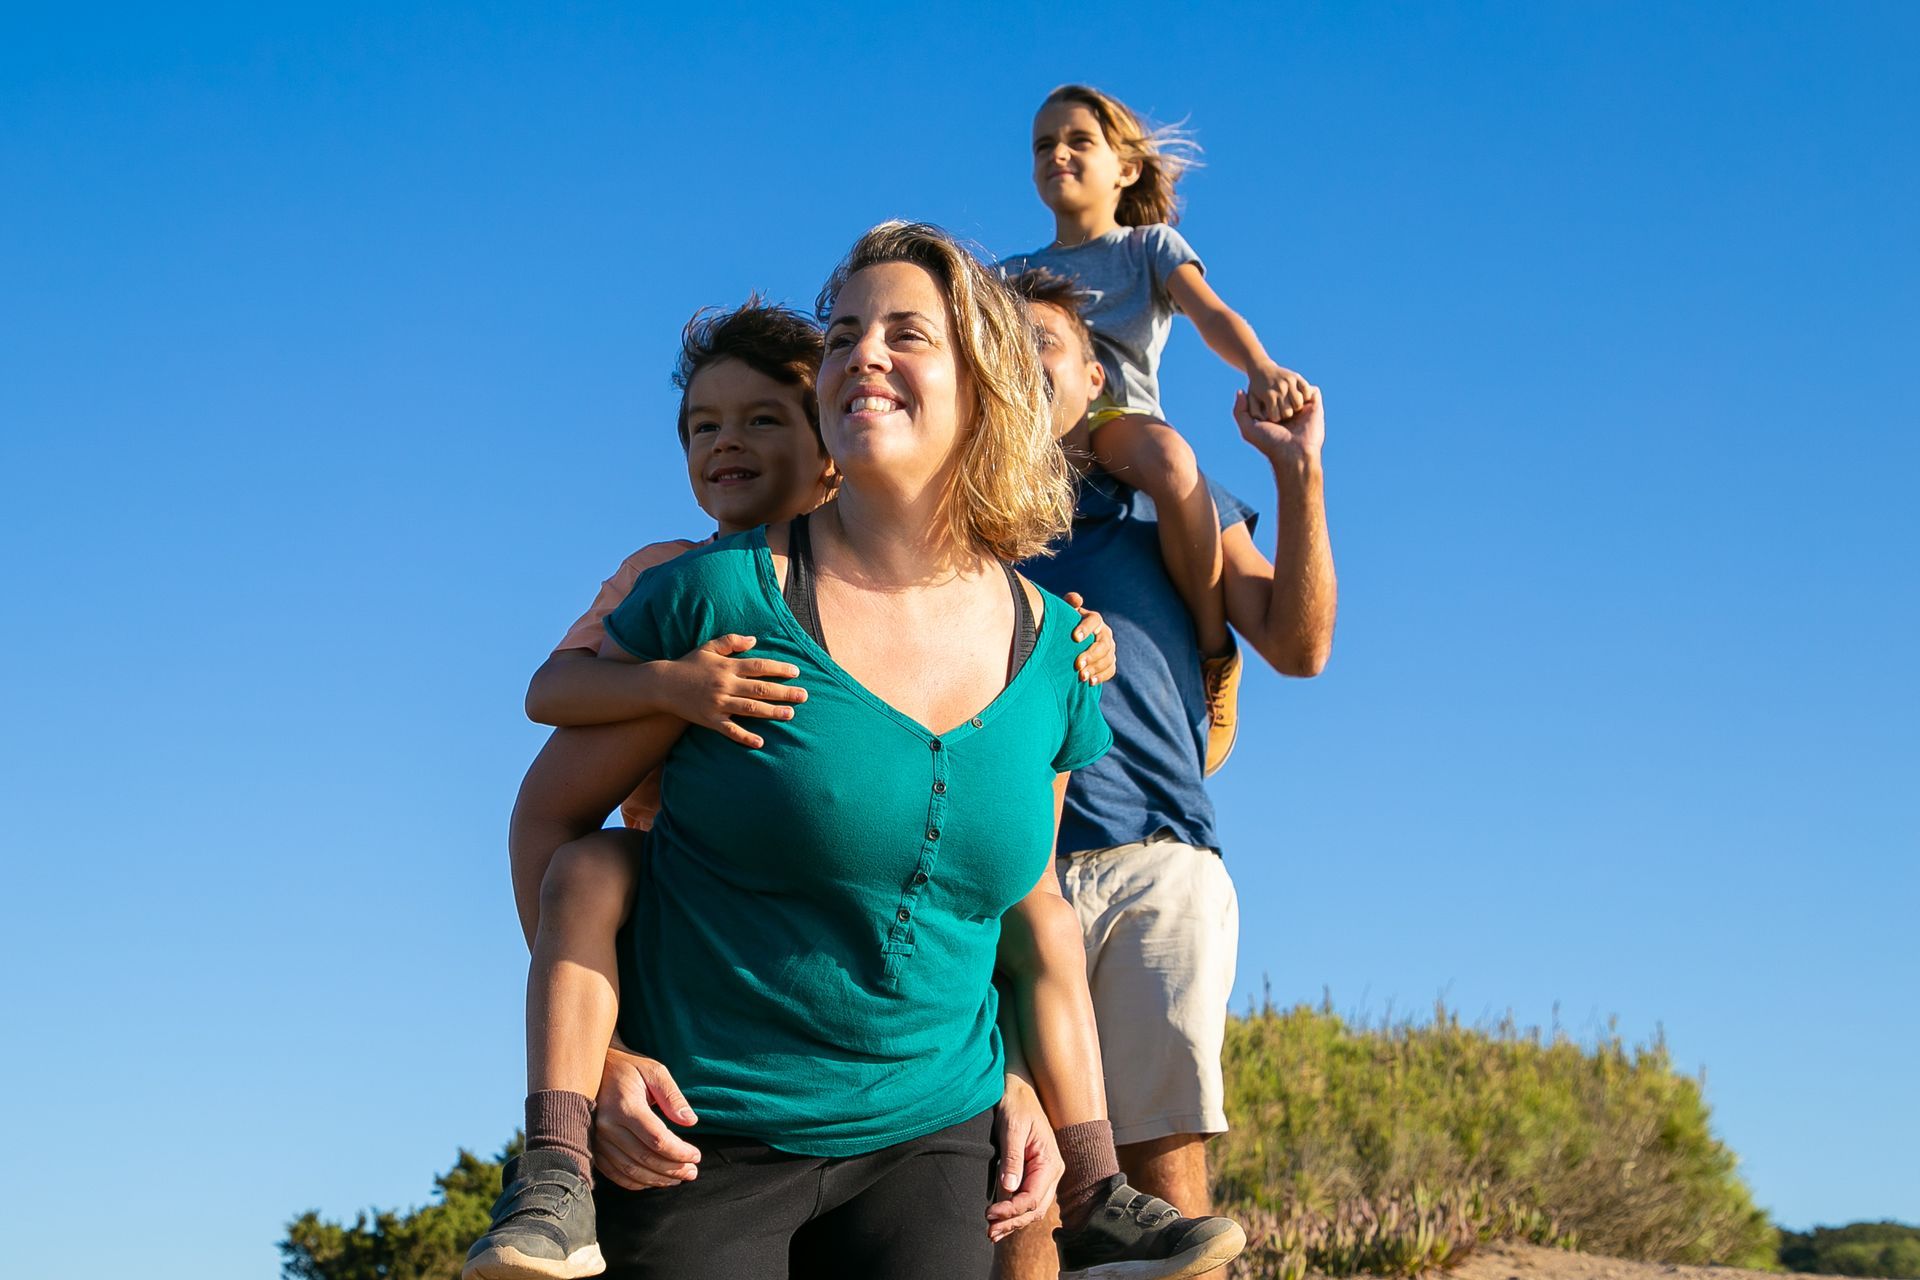 a woman in a green shirt is carrying two children on her shoulders